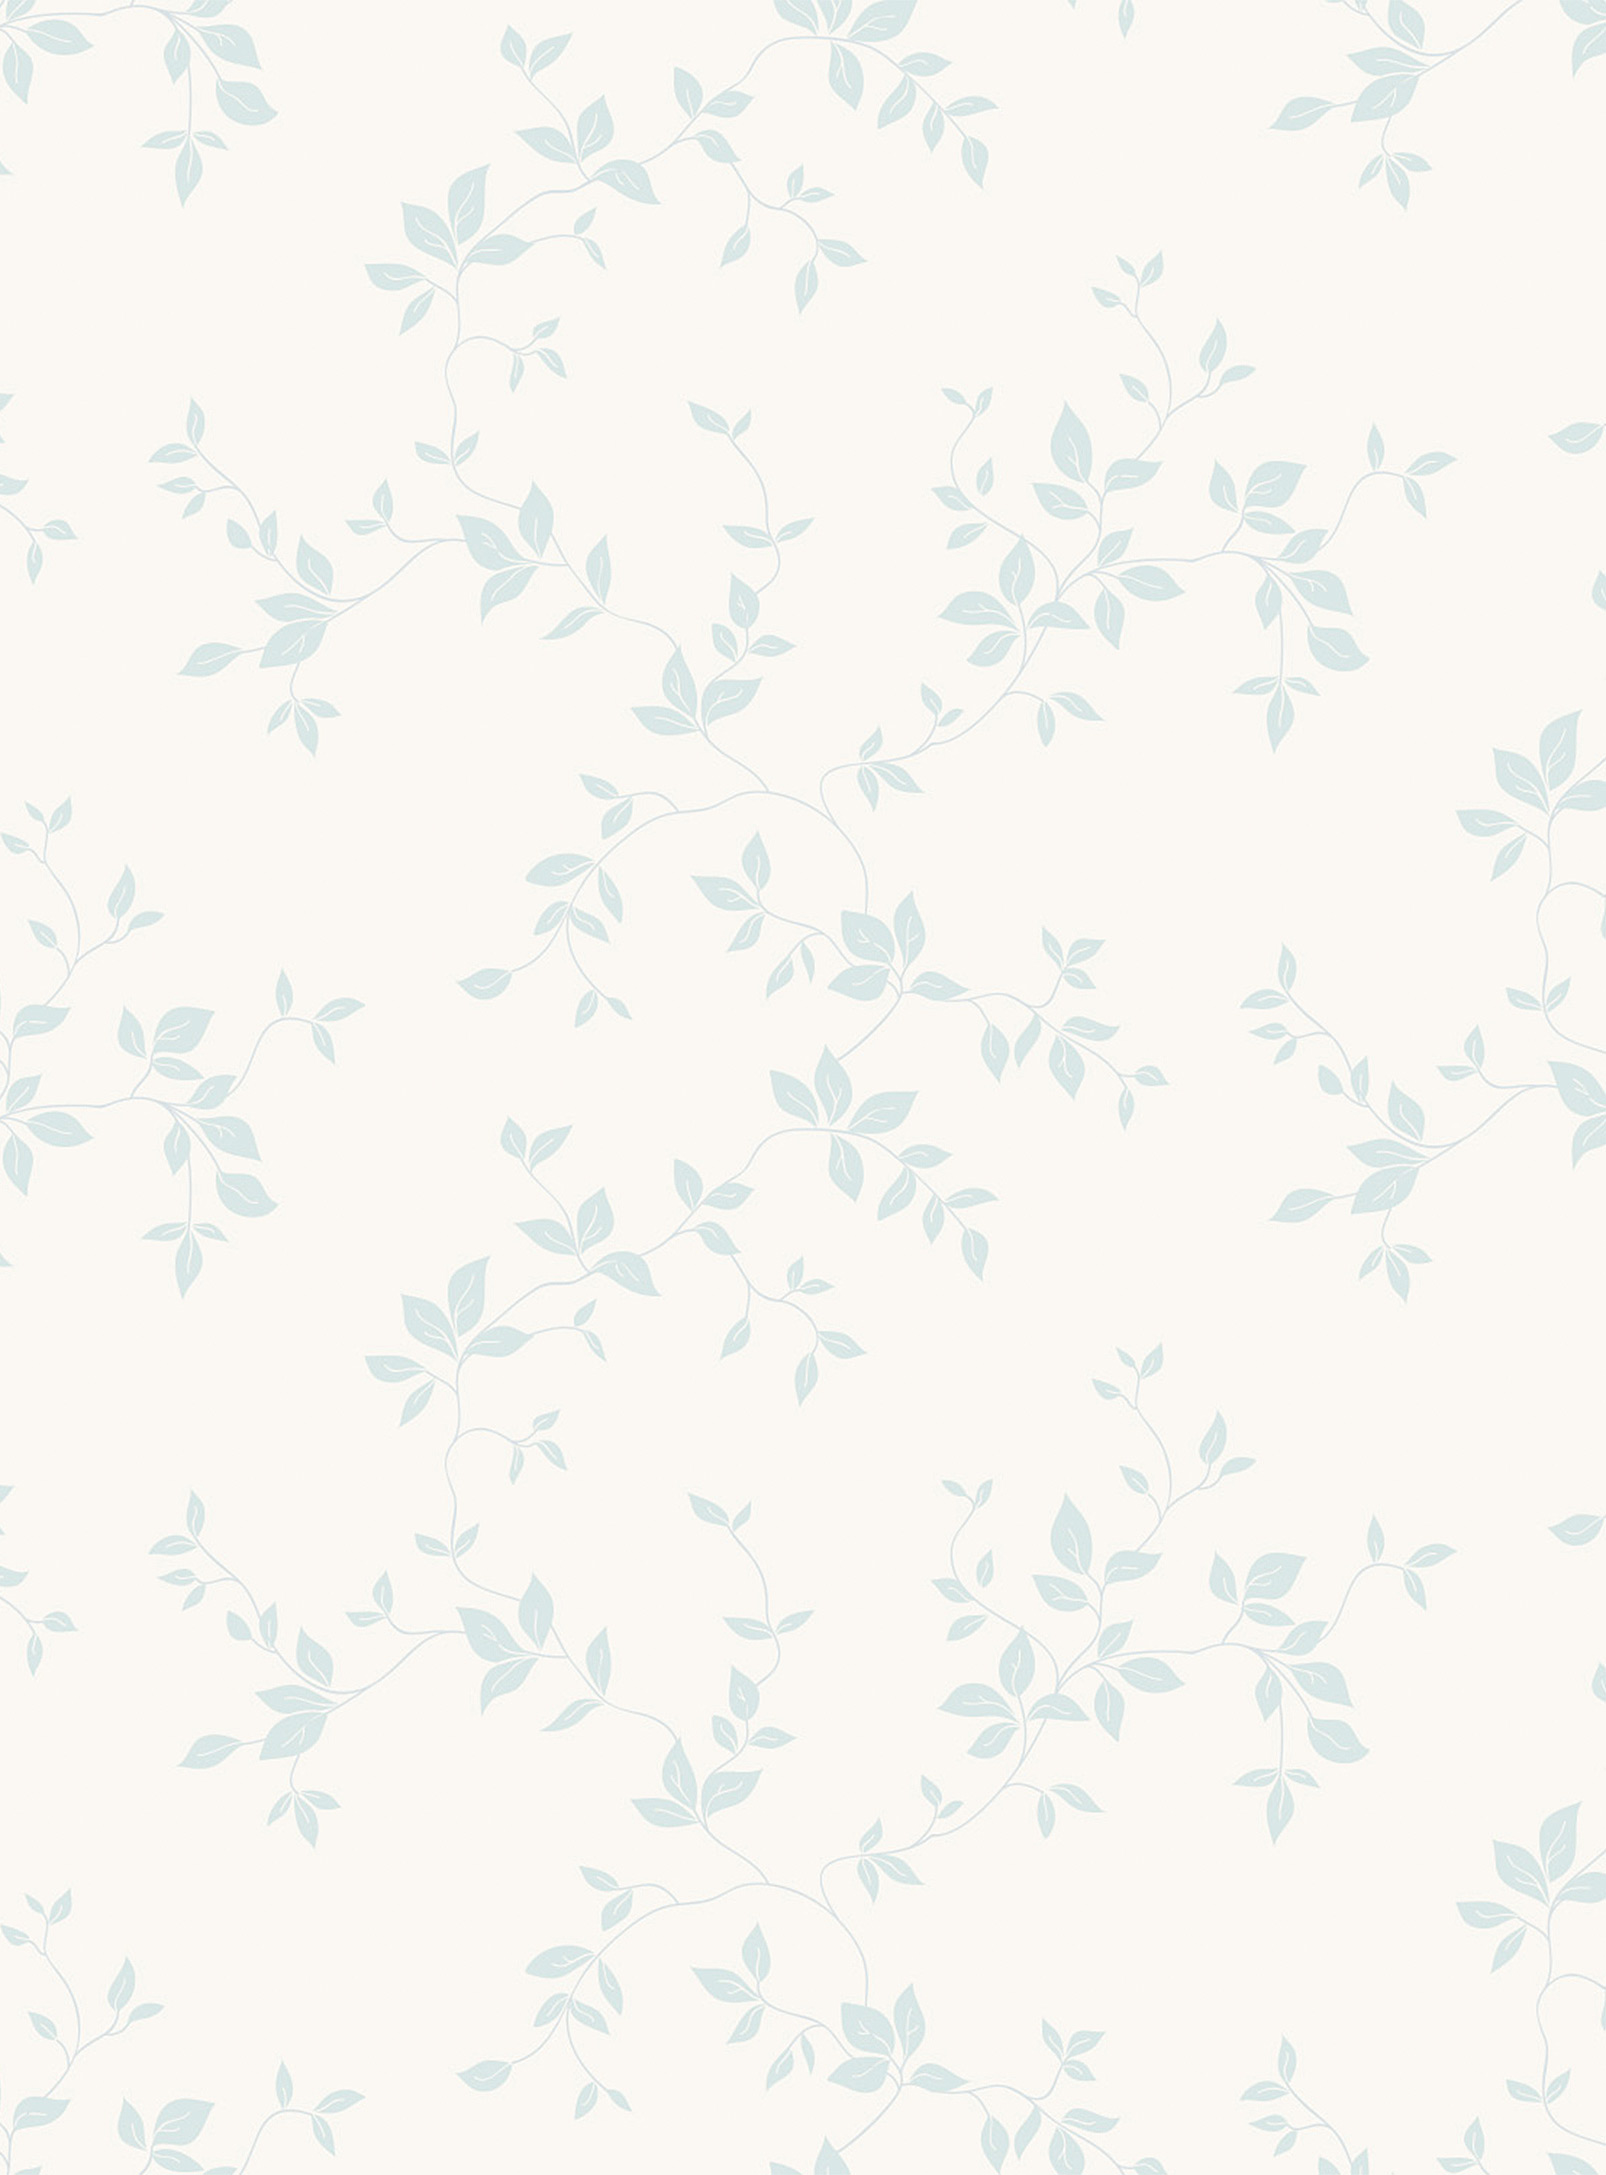 Station D Rosane Flowery Wallpaper Strip See Available Sizes In Teal